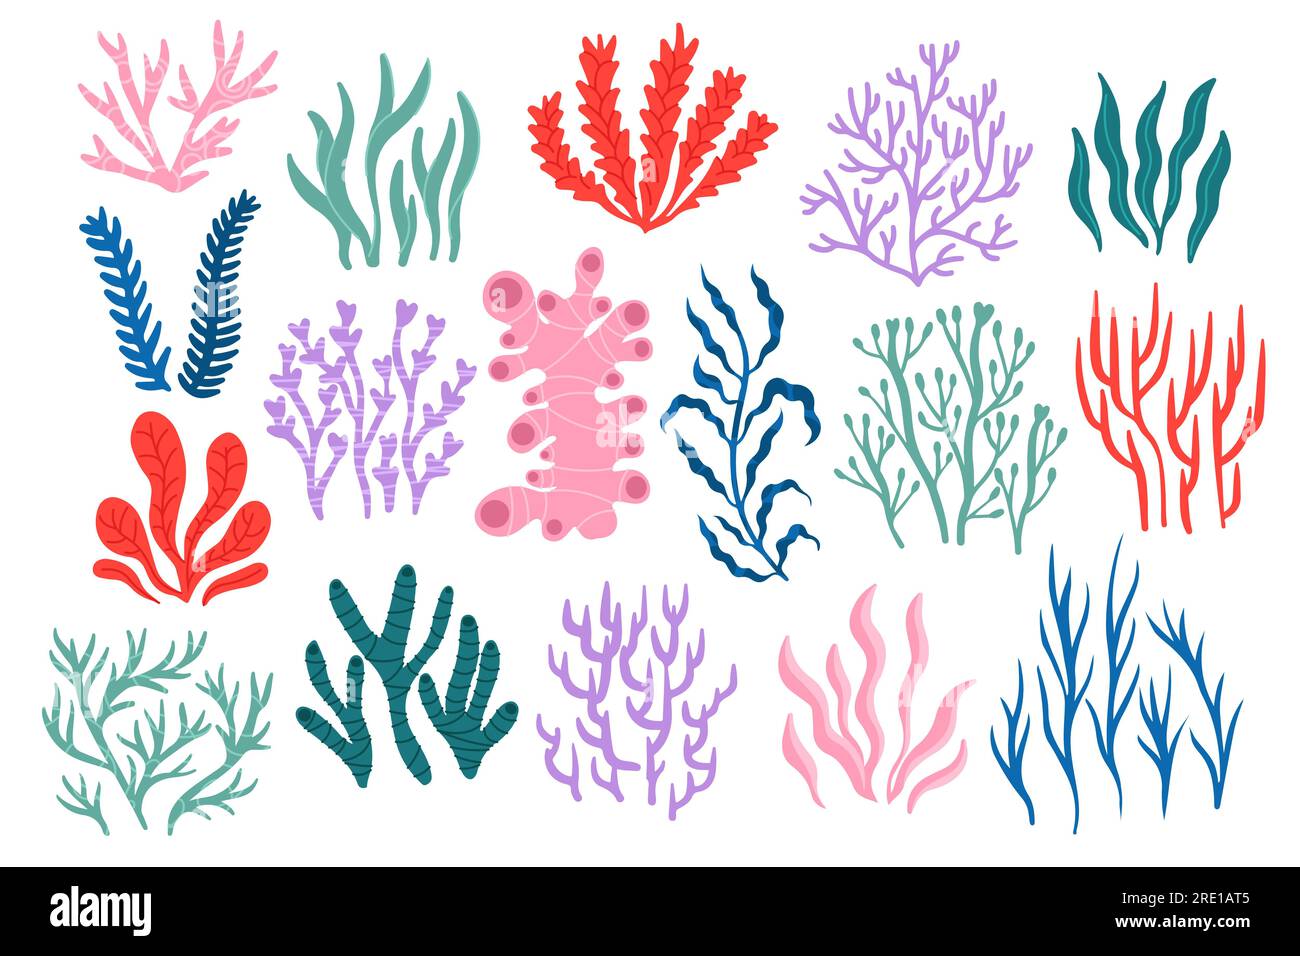 Sea corals. Tropical underwater flora and fauna, colorful coral reef collection of various shapes, exotic marine botany backdrop for sticker design Stock Vector